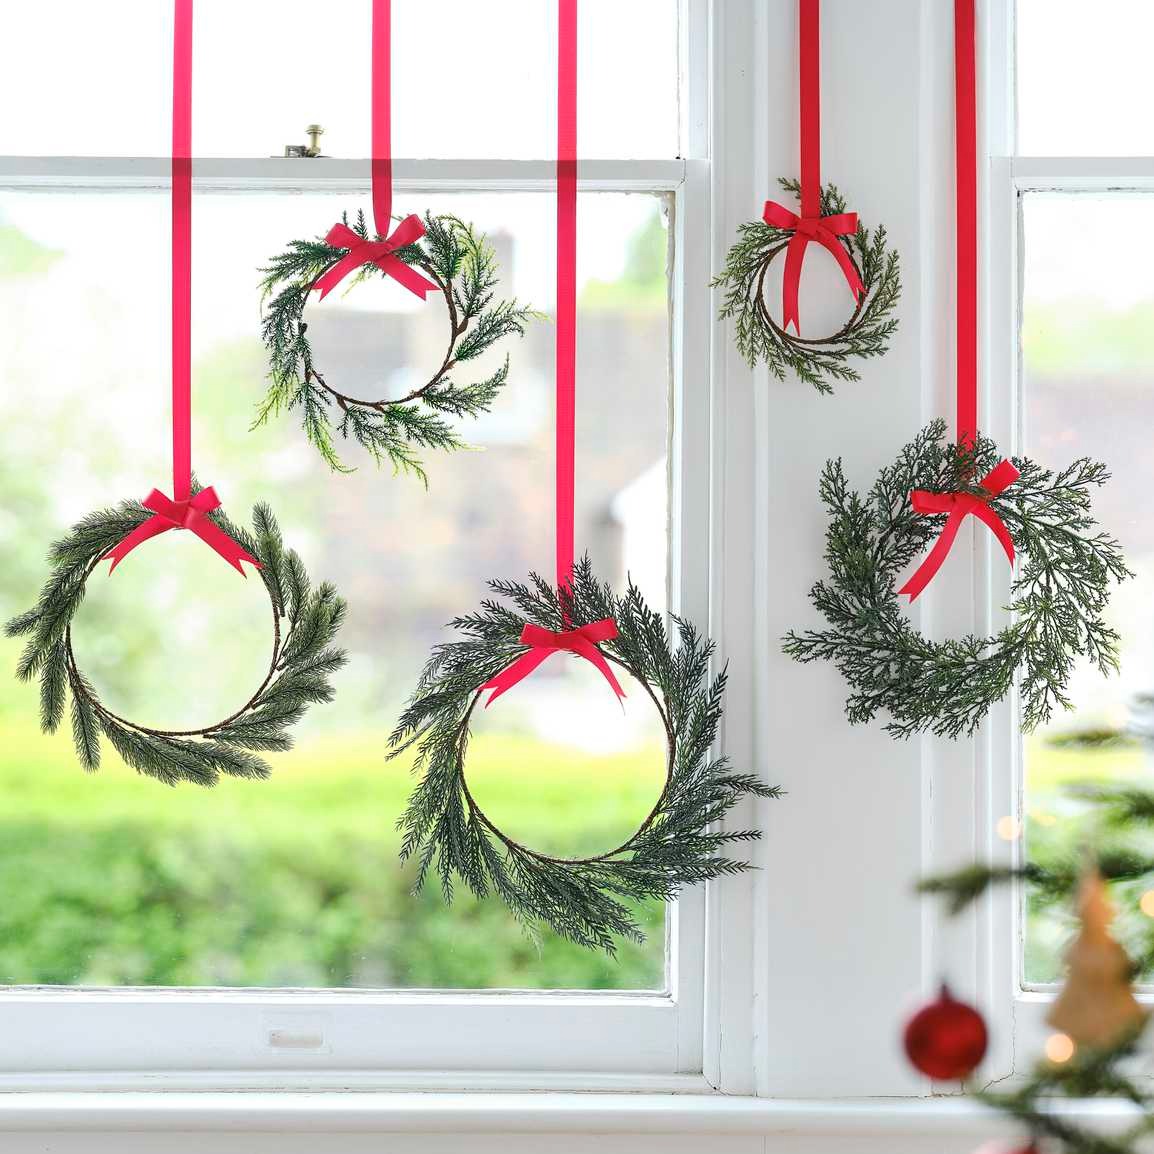 Hanging Christmas decoration with red ribbons